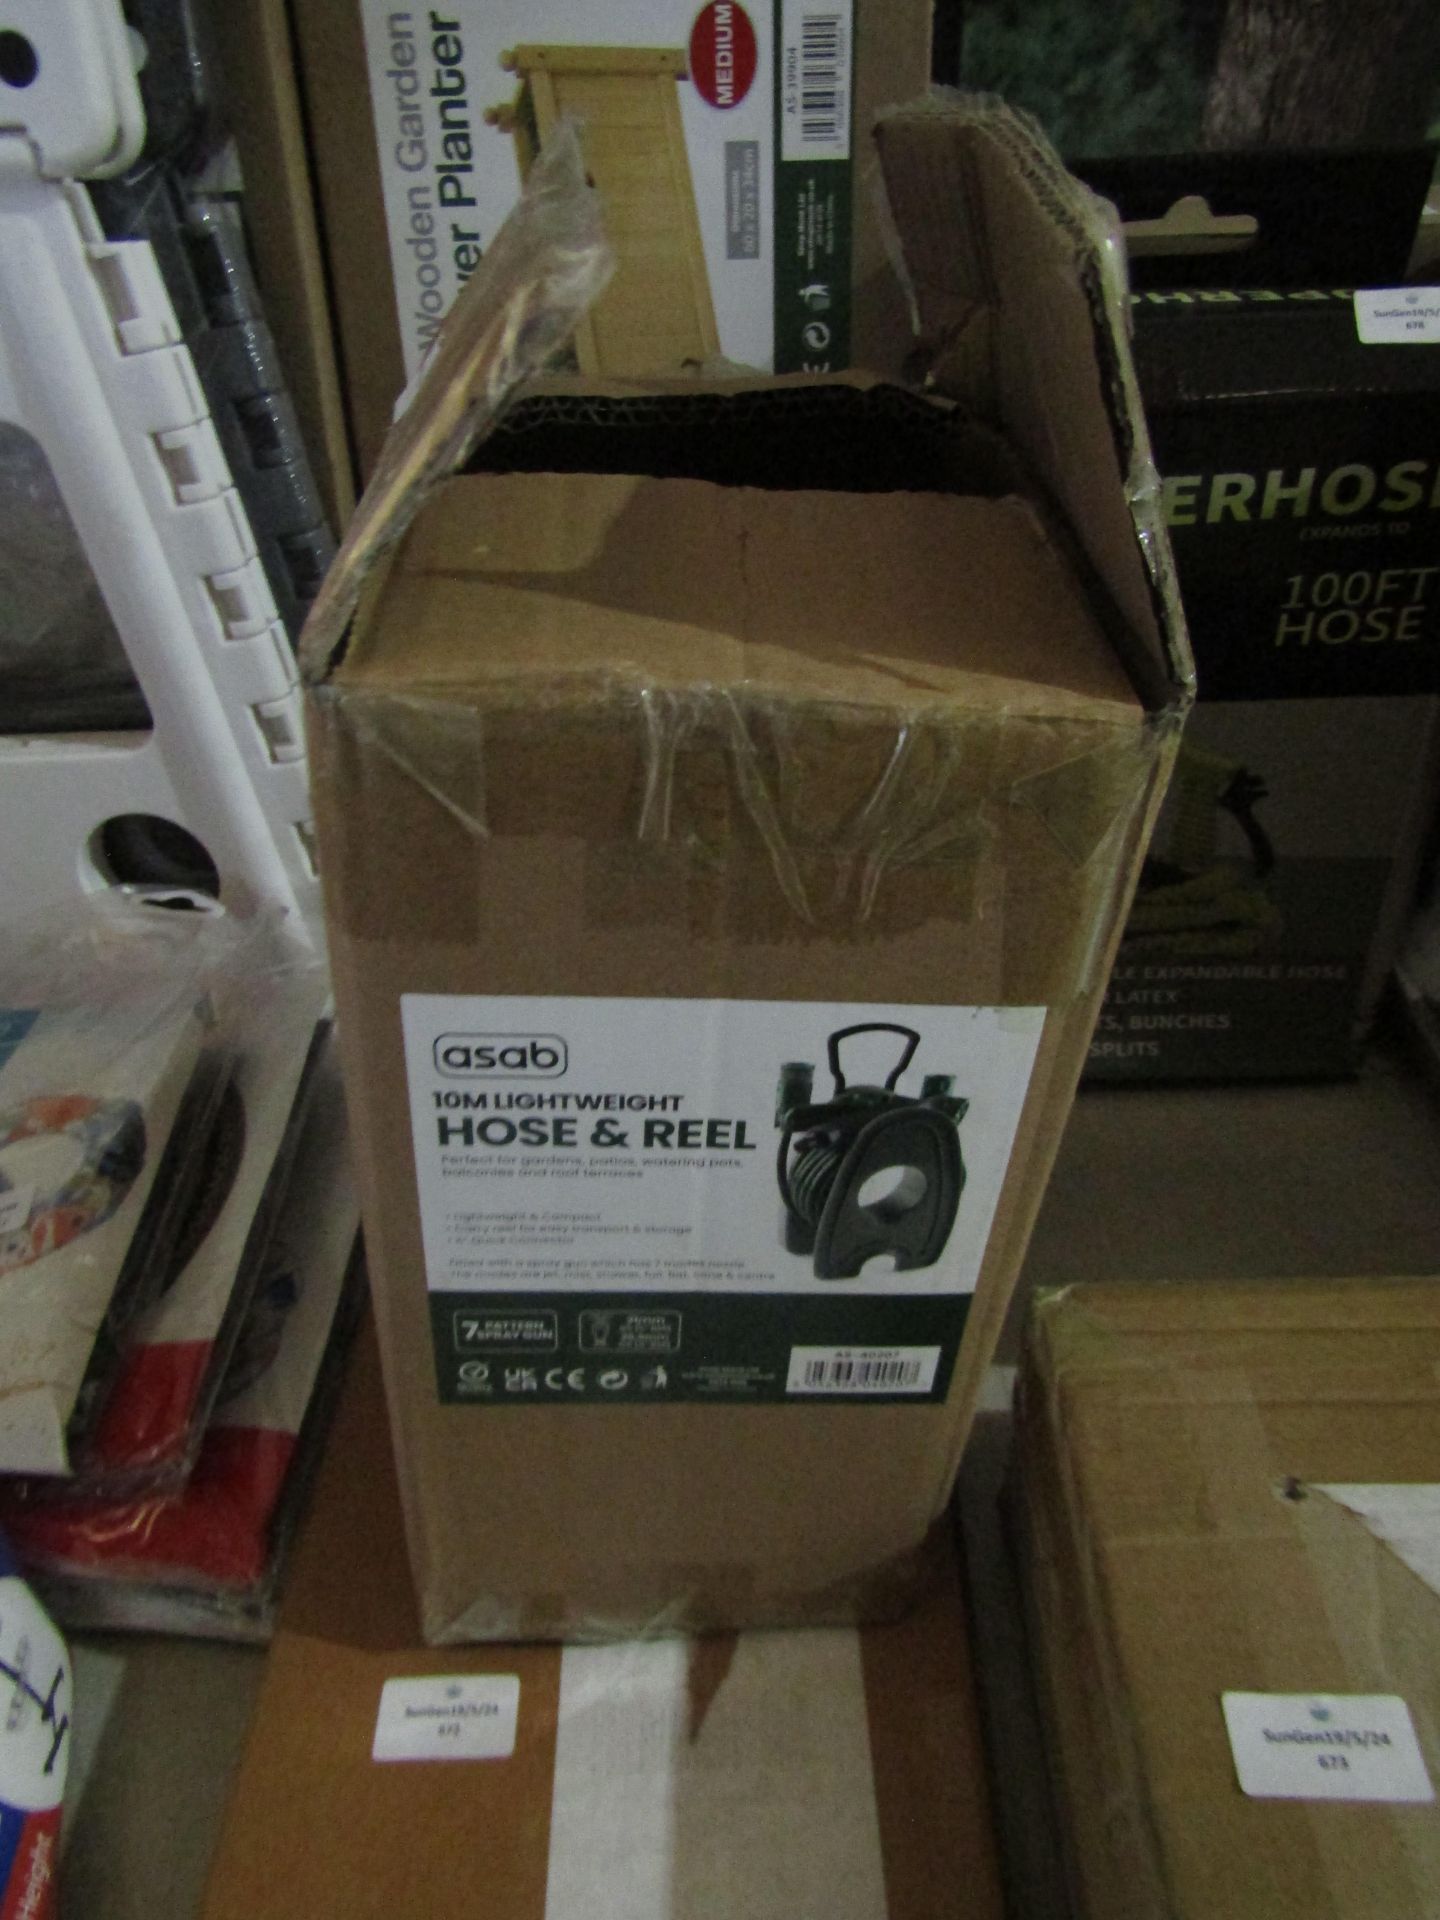 Asab 10m Lightweight Hose & Reel With 7 Pattern Spray Gun - Unchecked & Boxed.